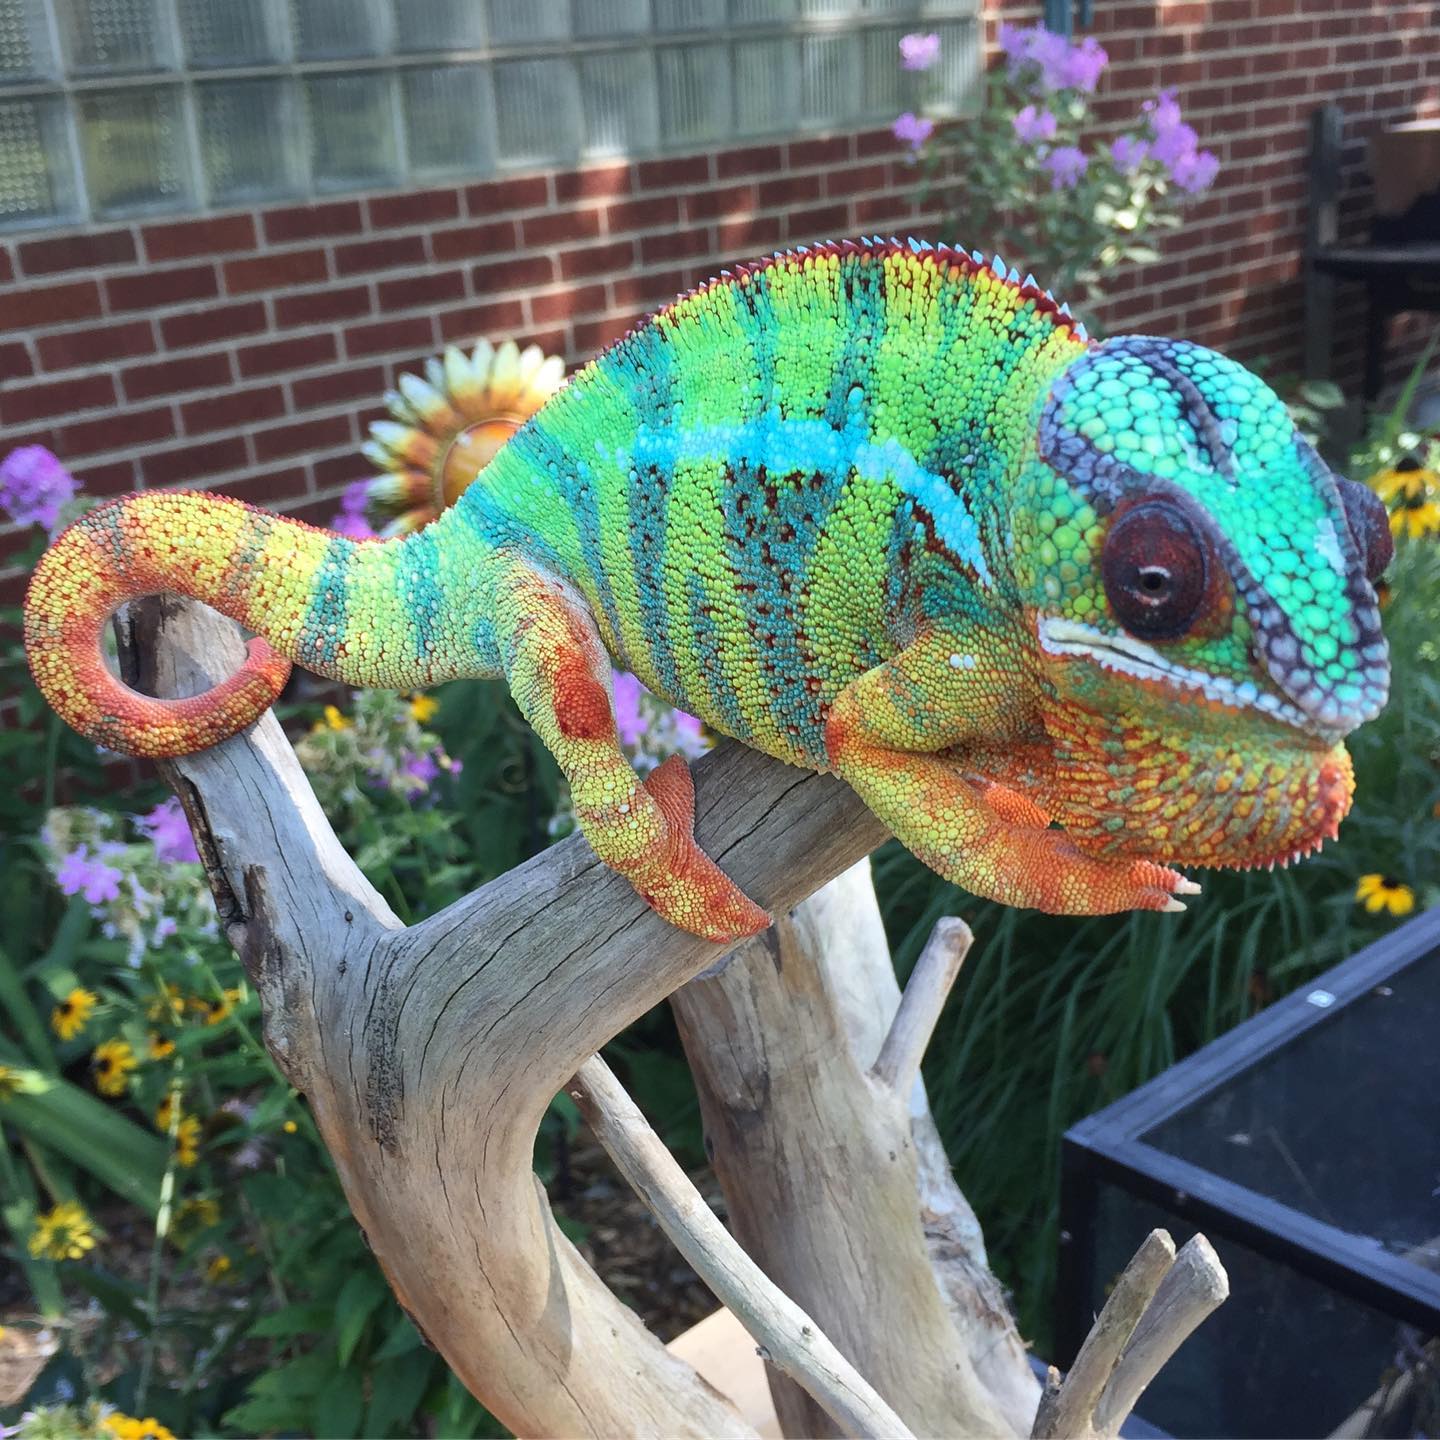 Lineage: Chi-Town Chameleons